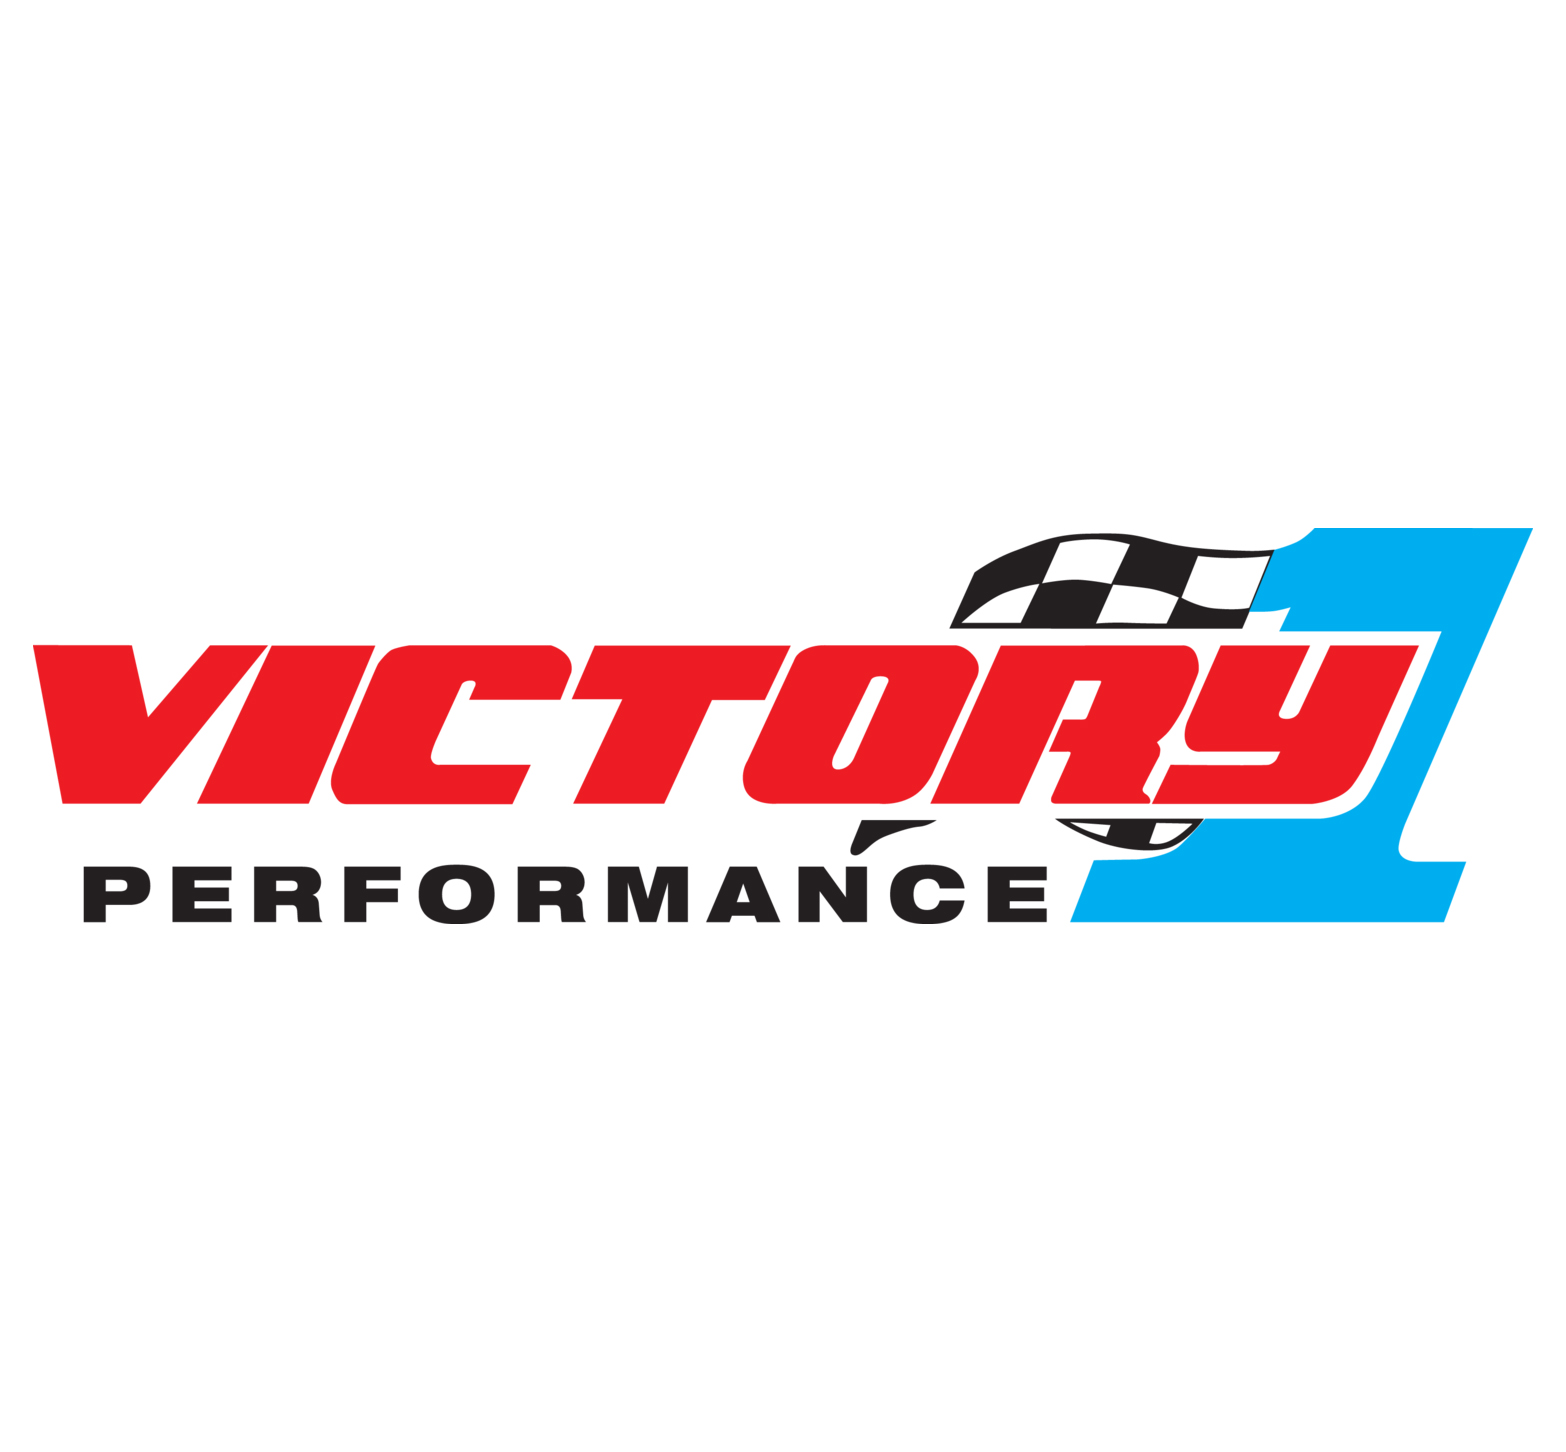 VICTORY 1 PERFORMANCE